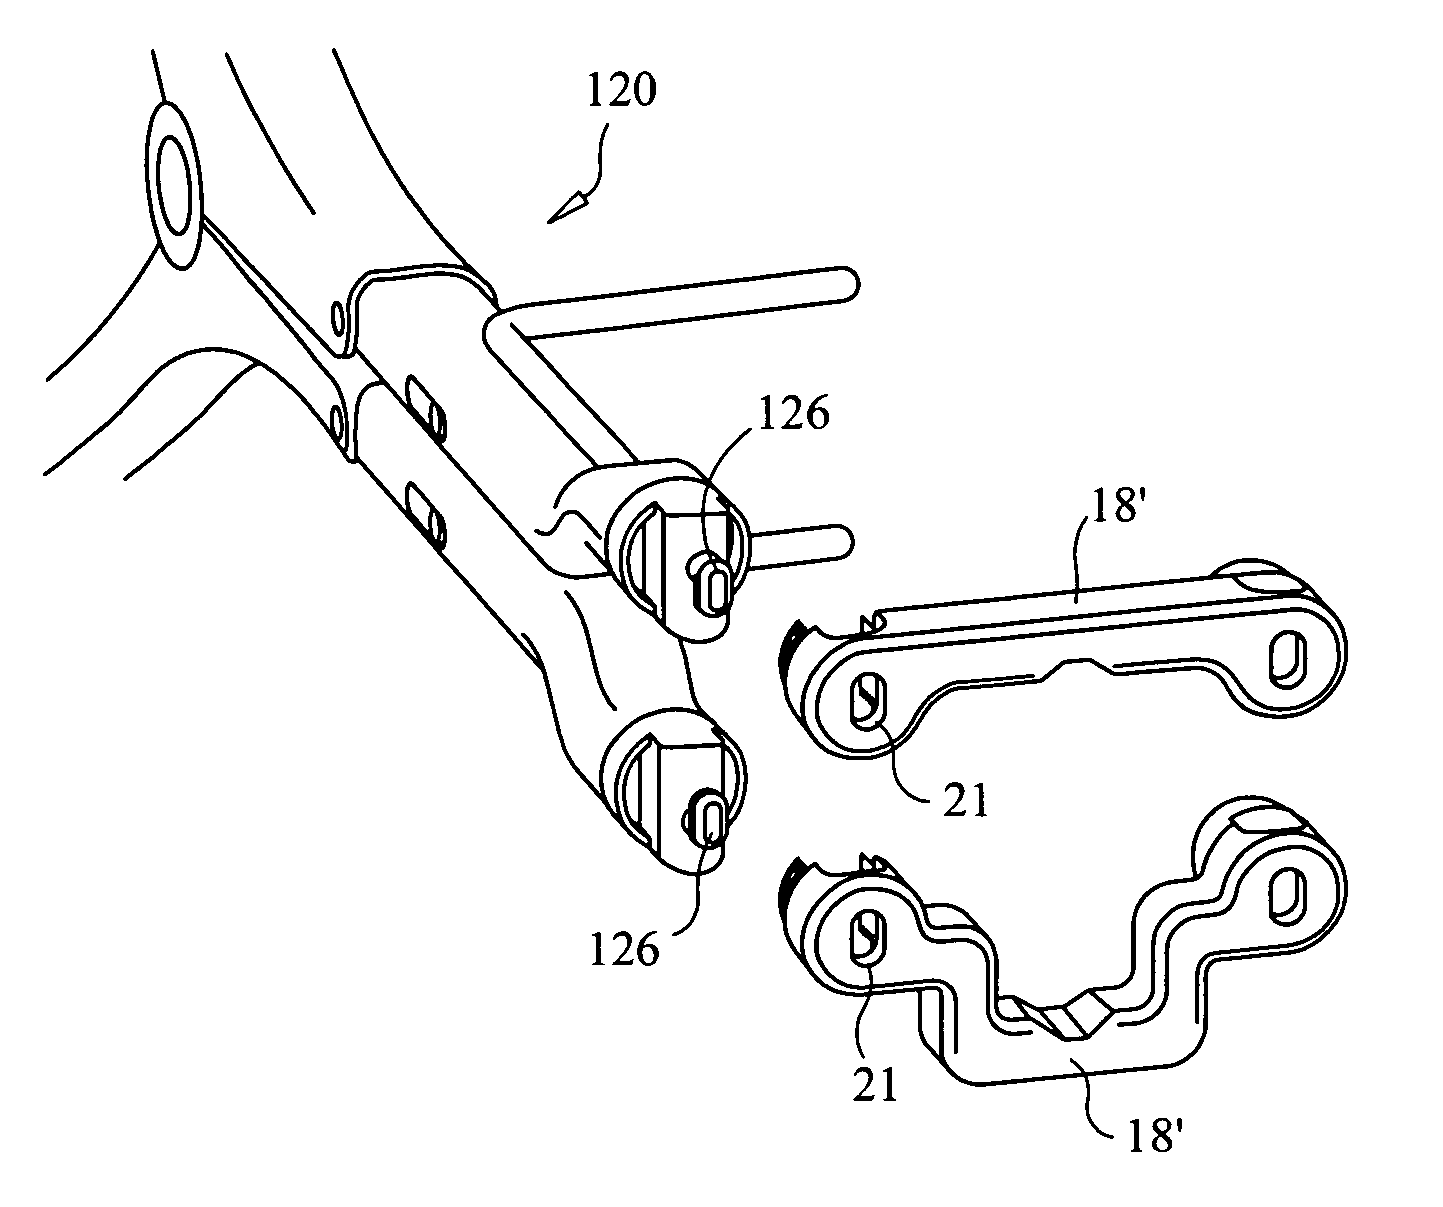 Interspinous implant, tools and methods of implanting